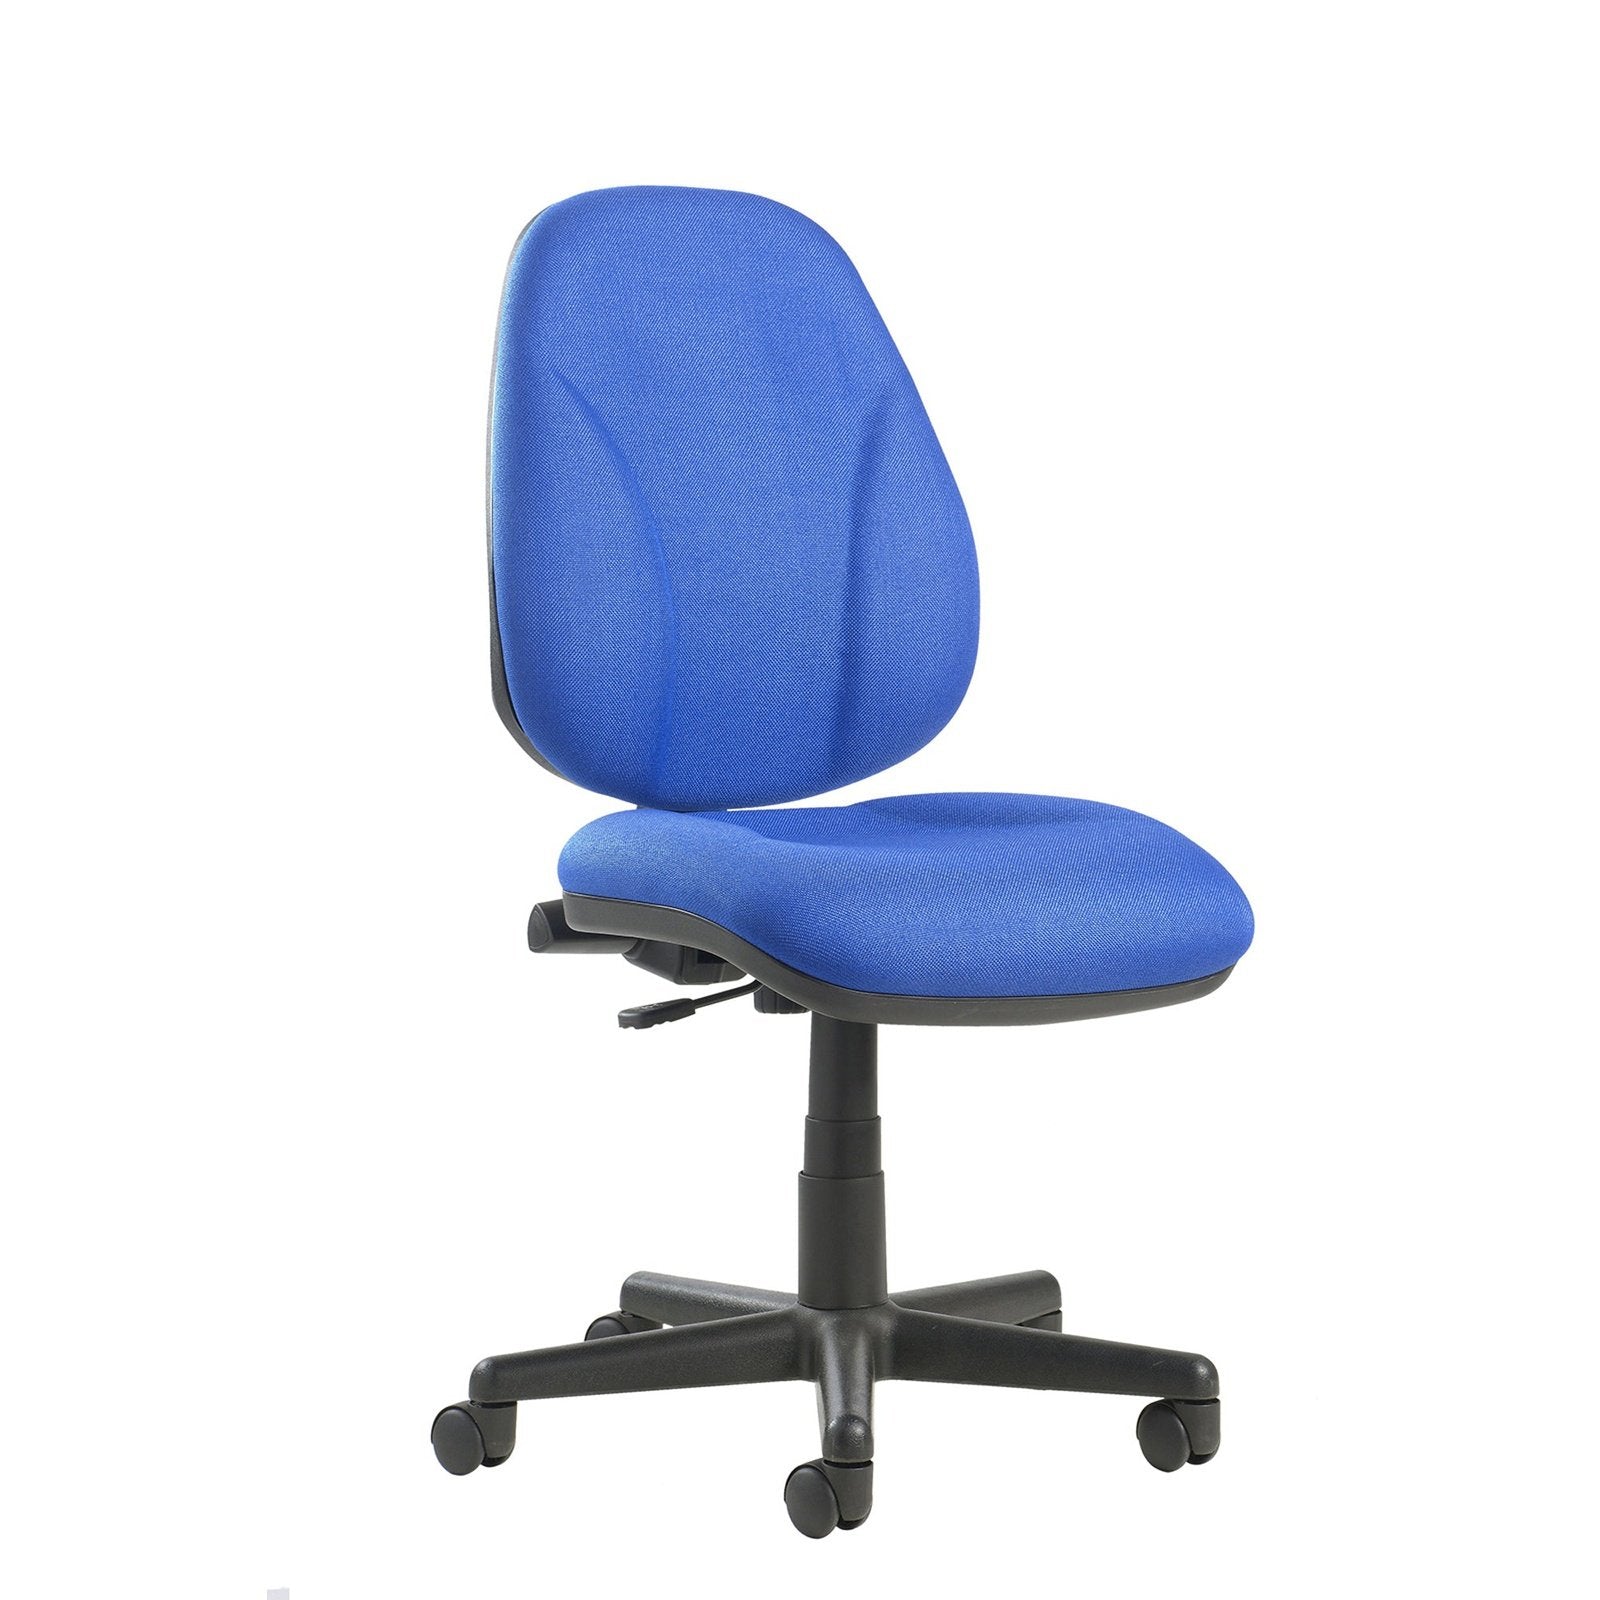 Bilbao fabric operators chair - Office Products Online